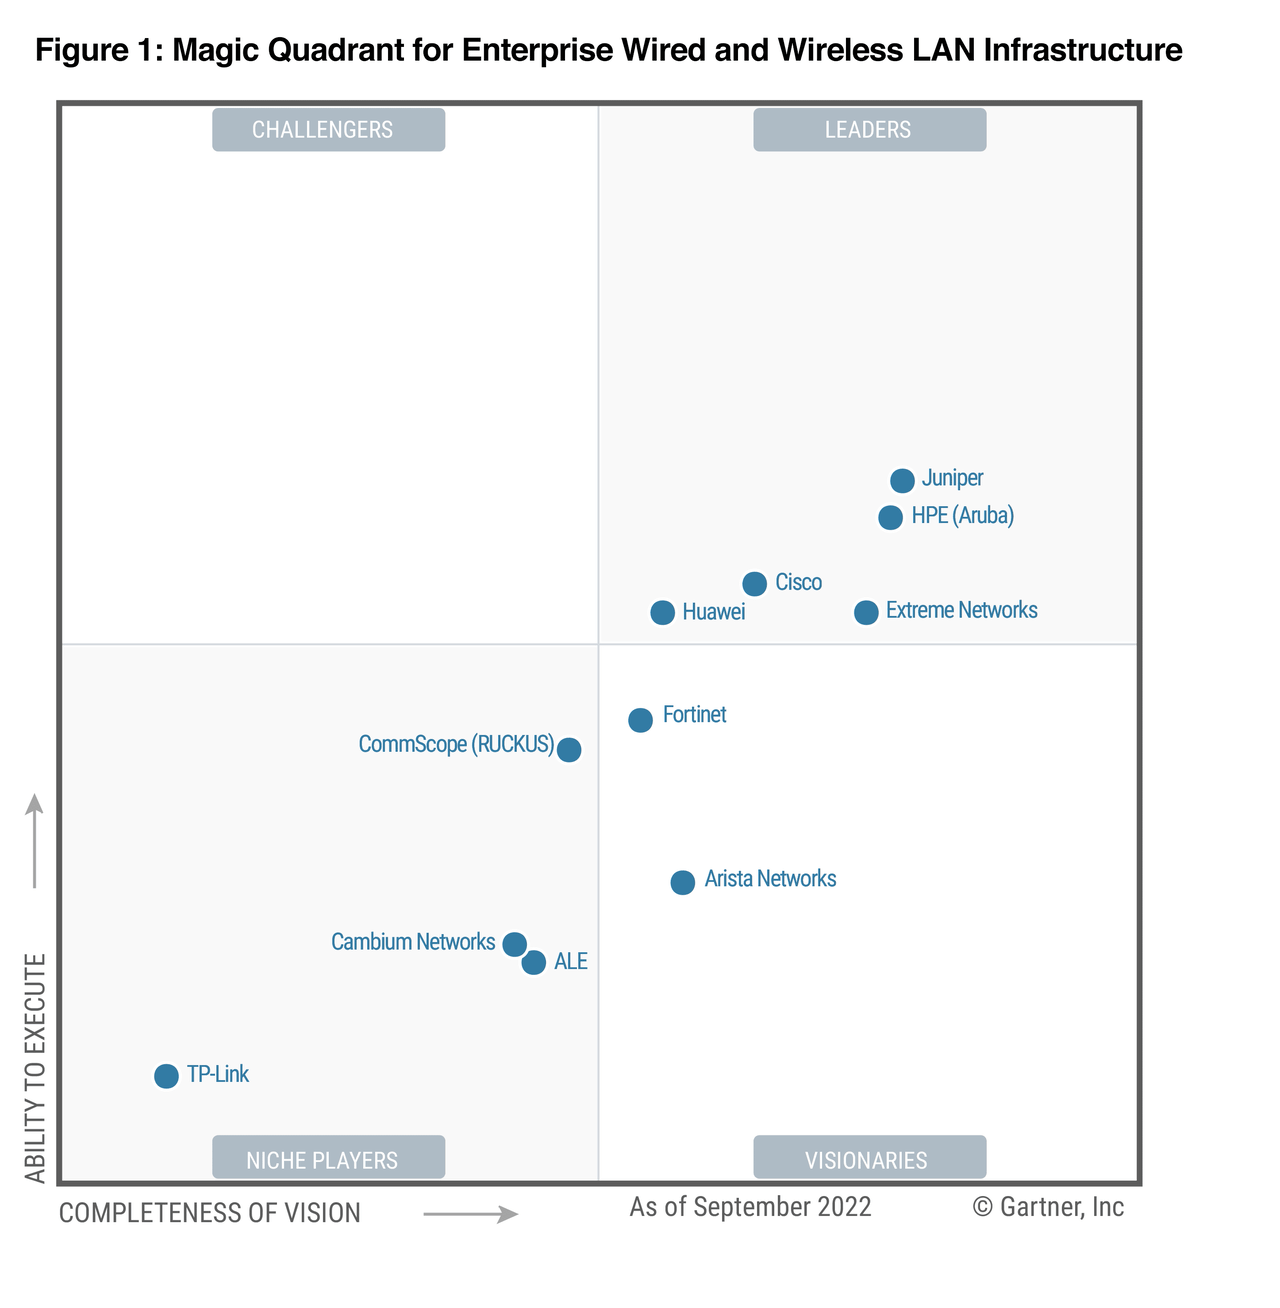 2022 Gartner® Magic Quadrant™ for Enterprise Wired and Wireless LAN Infrastructure Figure 1. The figure ranks companies on their ability to execute and completeness of vision as of December 2022 on a scatter plot. Fortinet is in the lower right quadrant of Vsionaries.